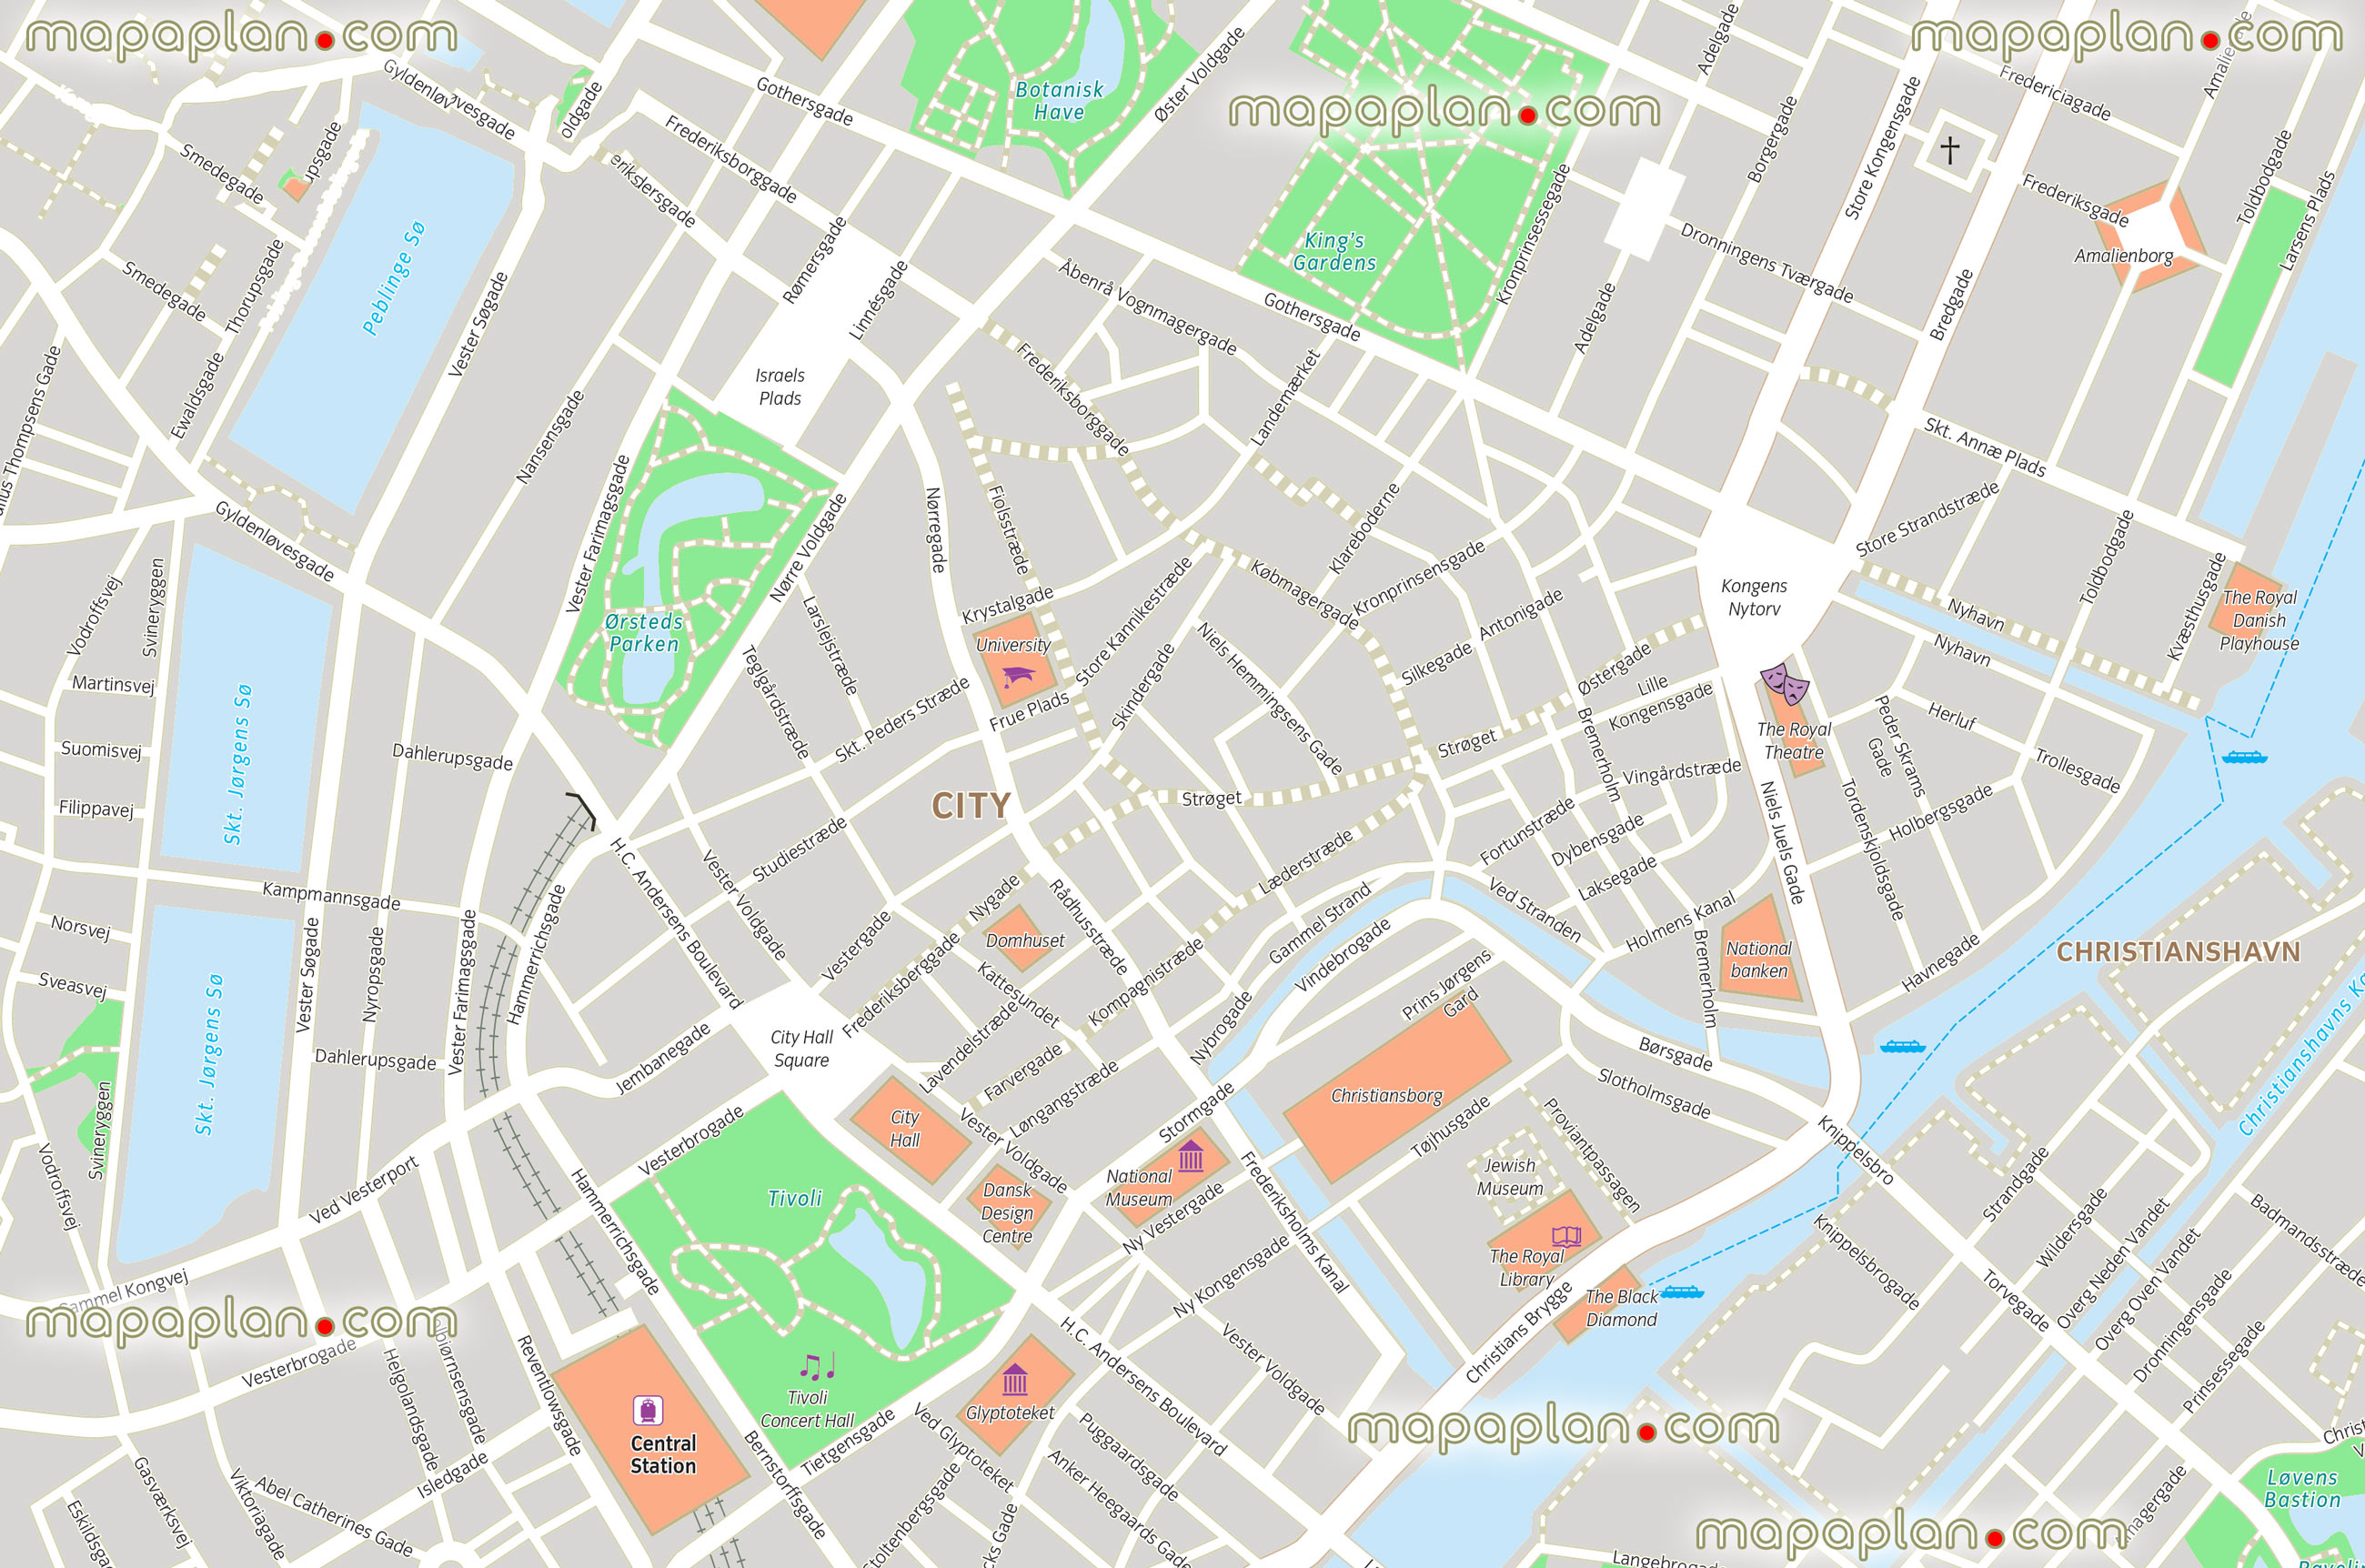 central copenhagen attractions printable top sights must see iconic locations tivoli gardens little mermaids Copenhagen Top tourist attractions map